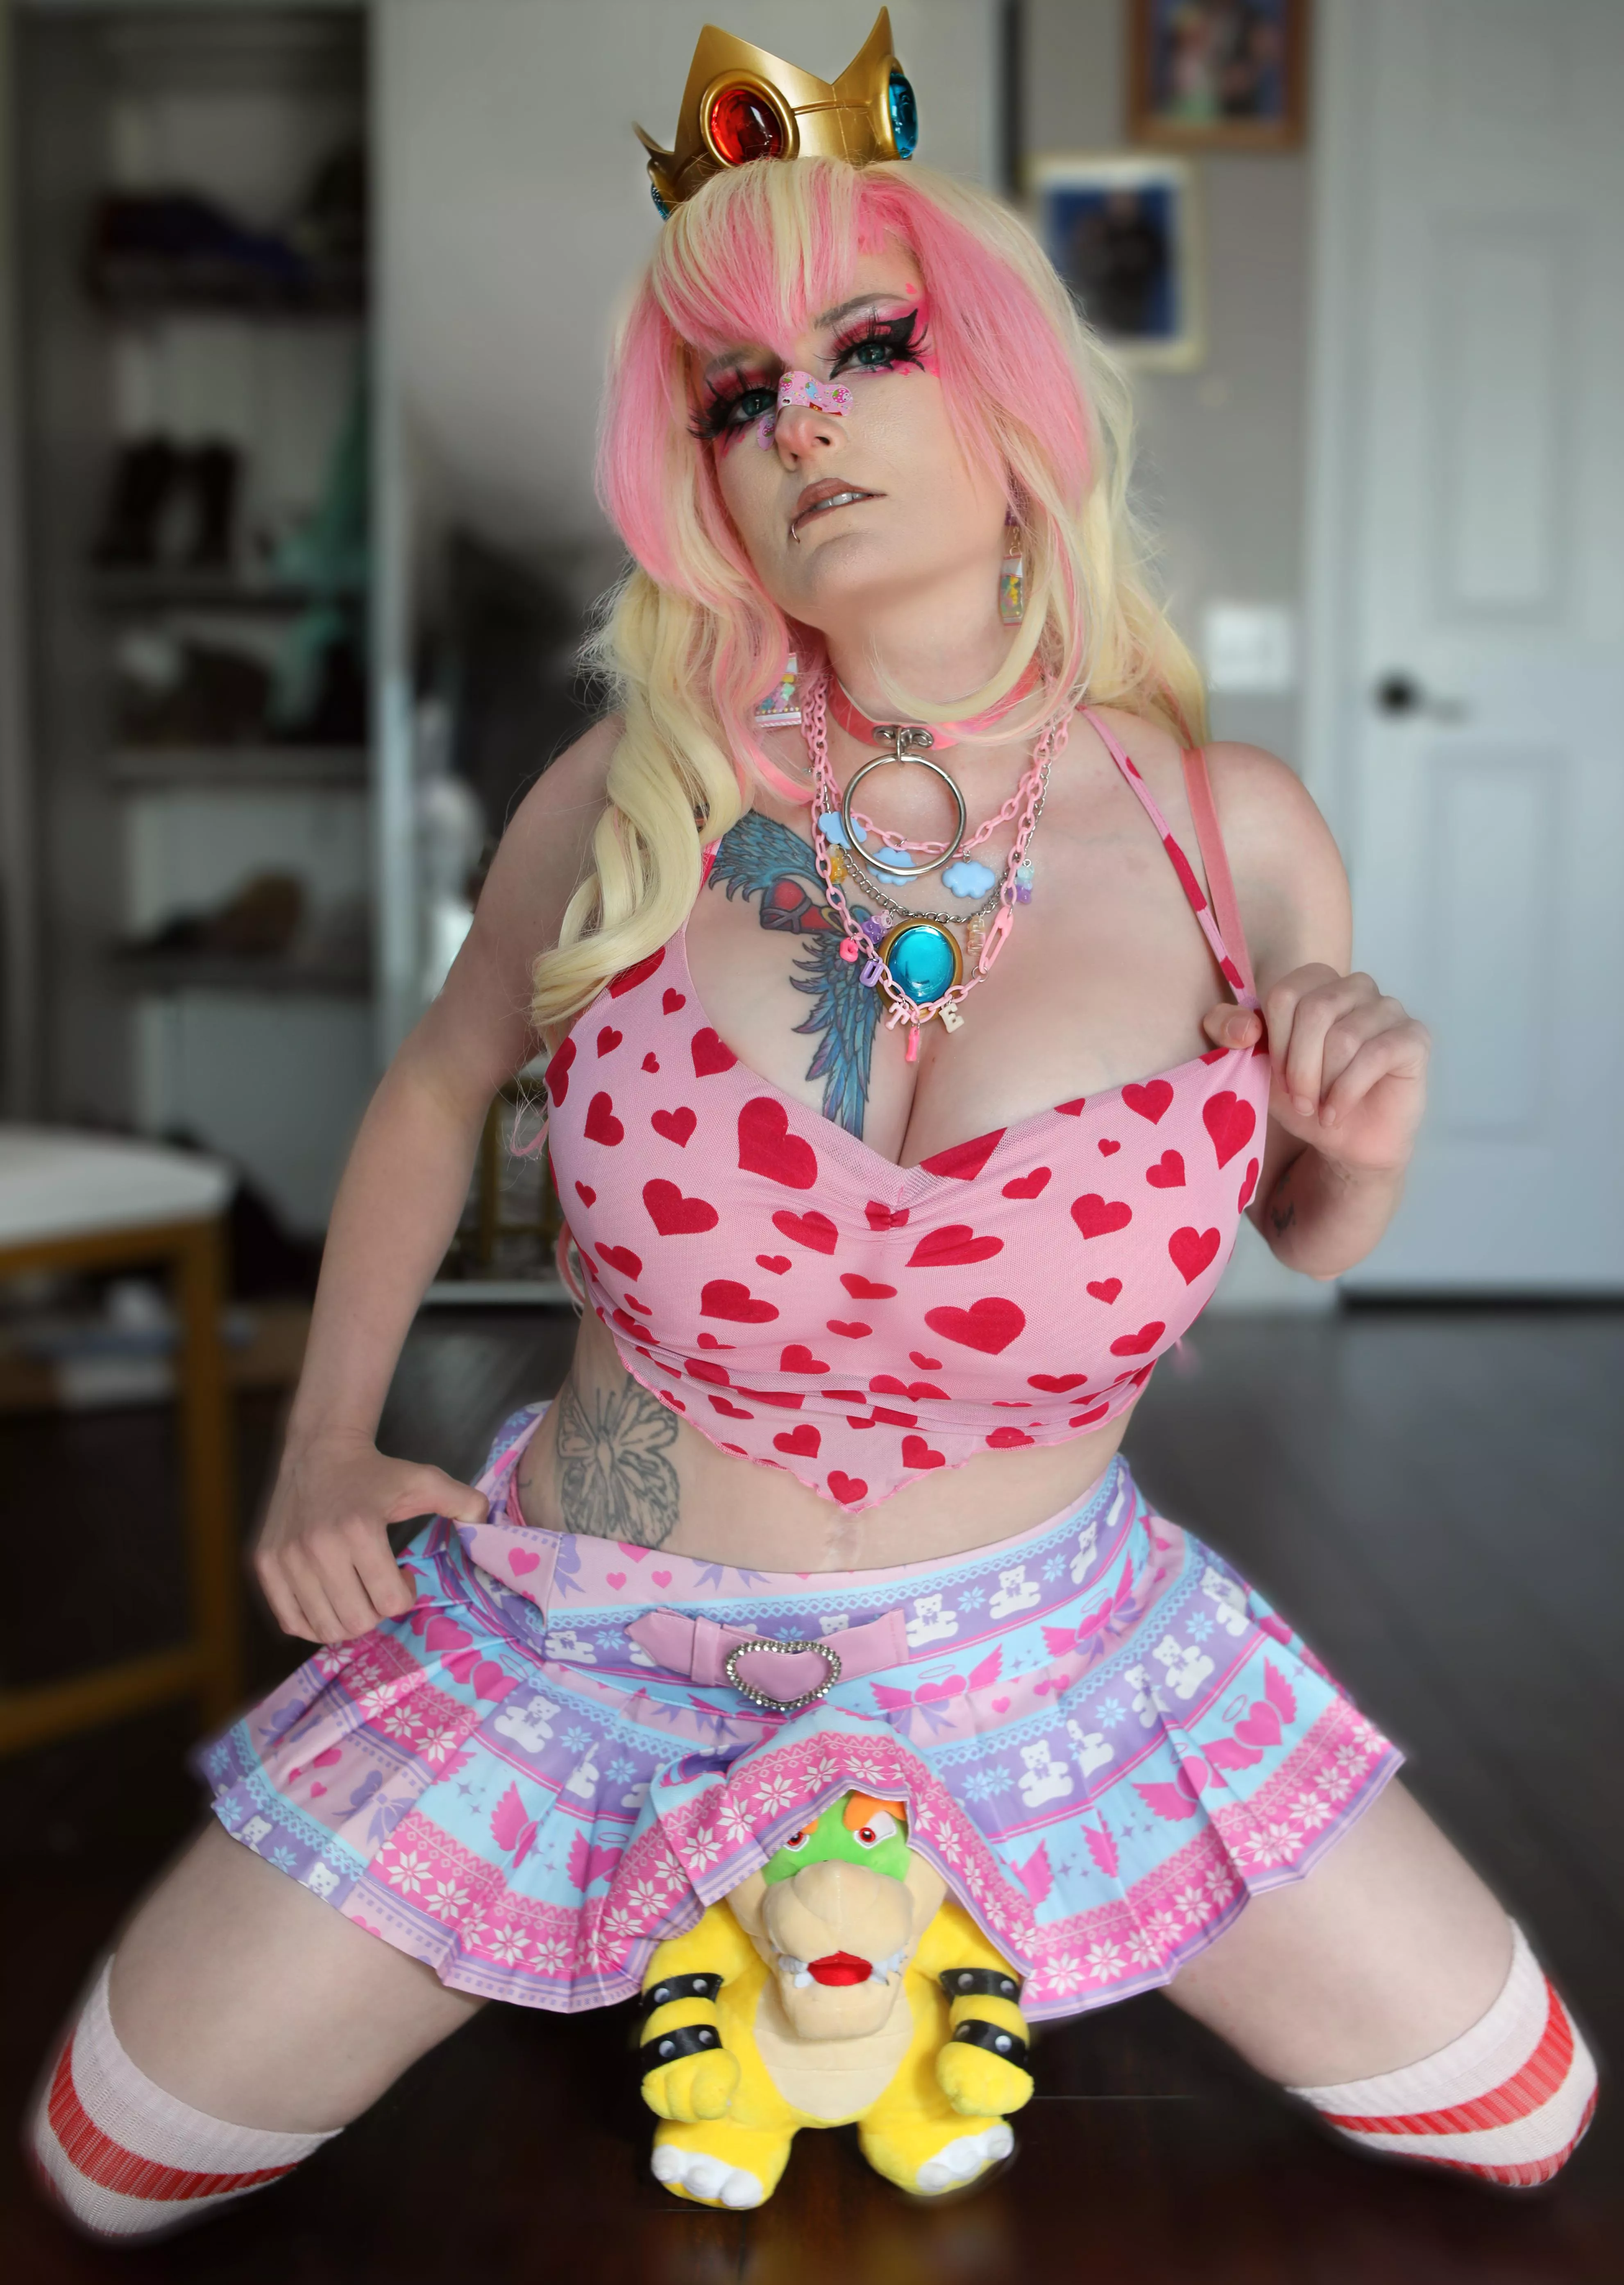 Egirl Princess Peach cosplay by Captive Cosplay nudes by Captive_Cosplay